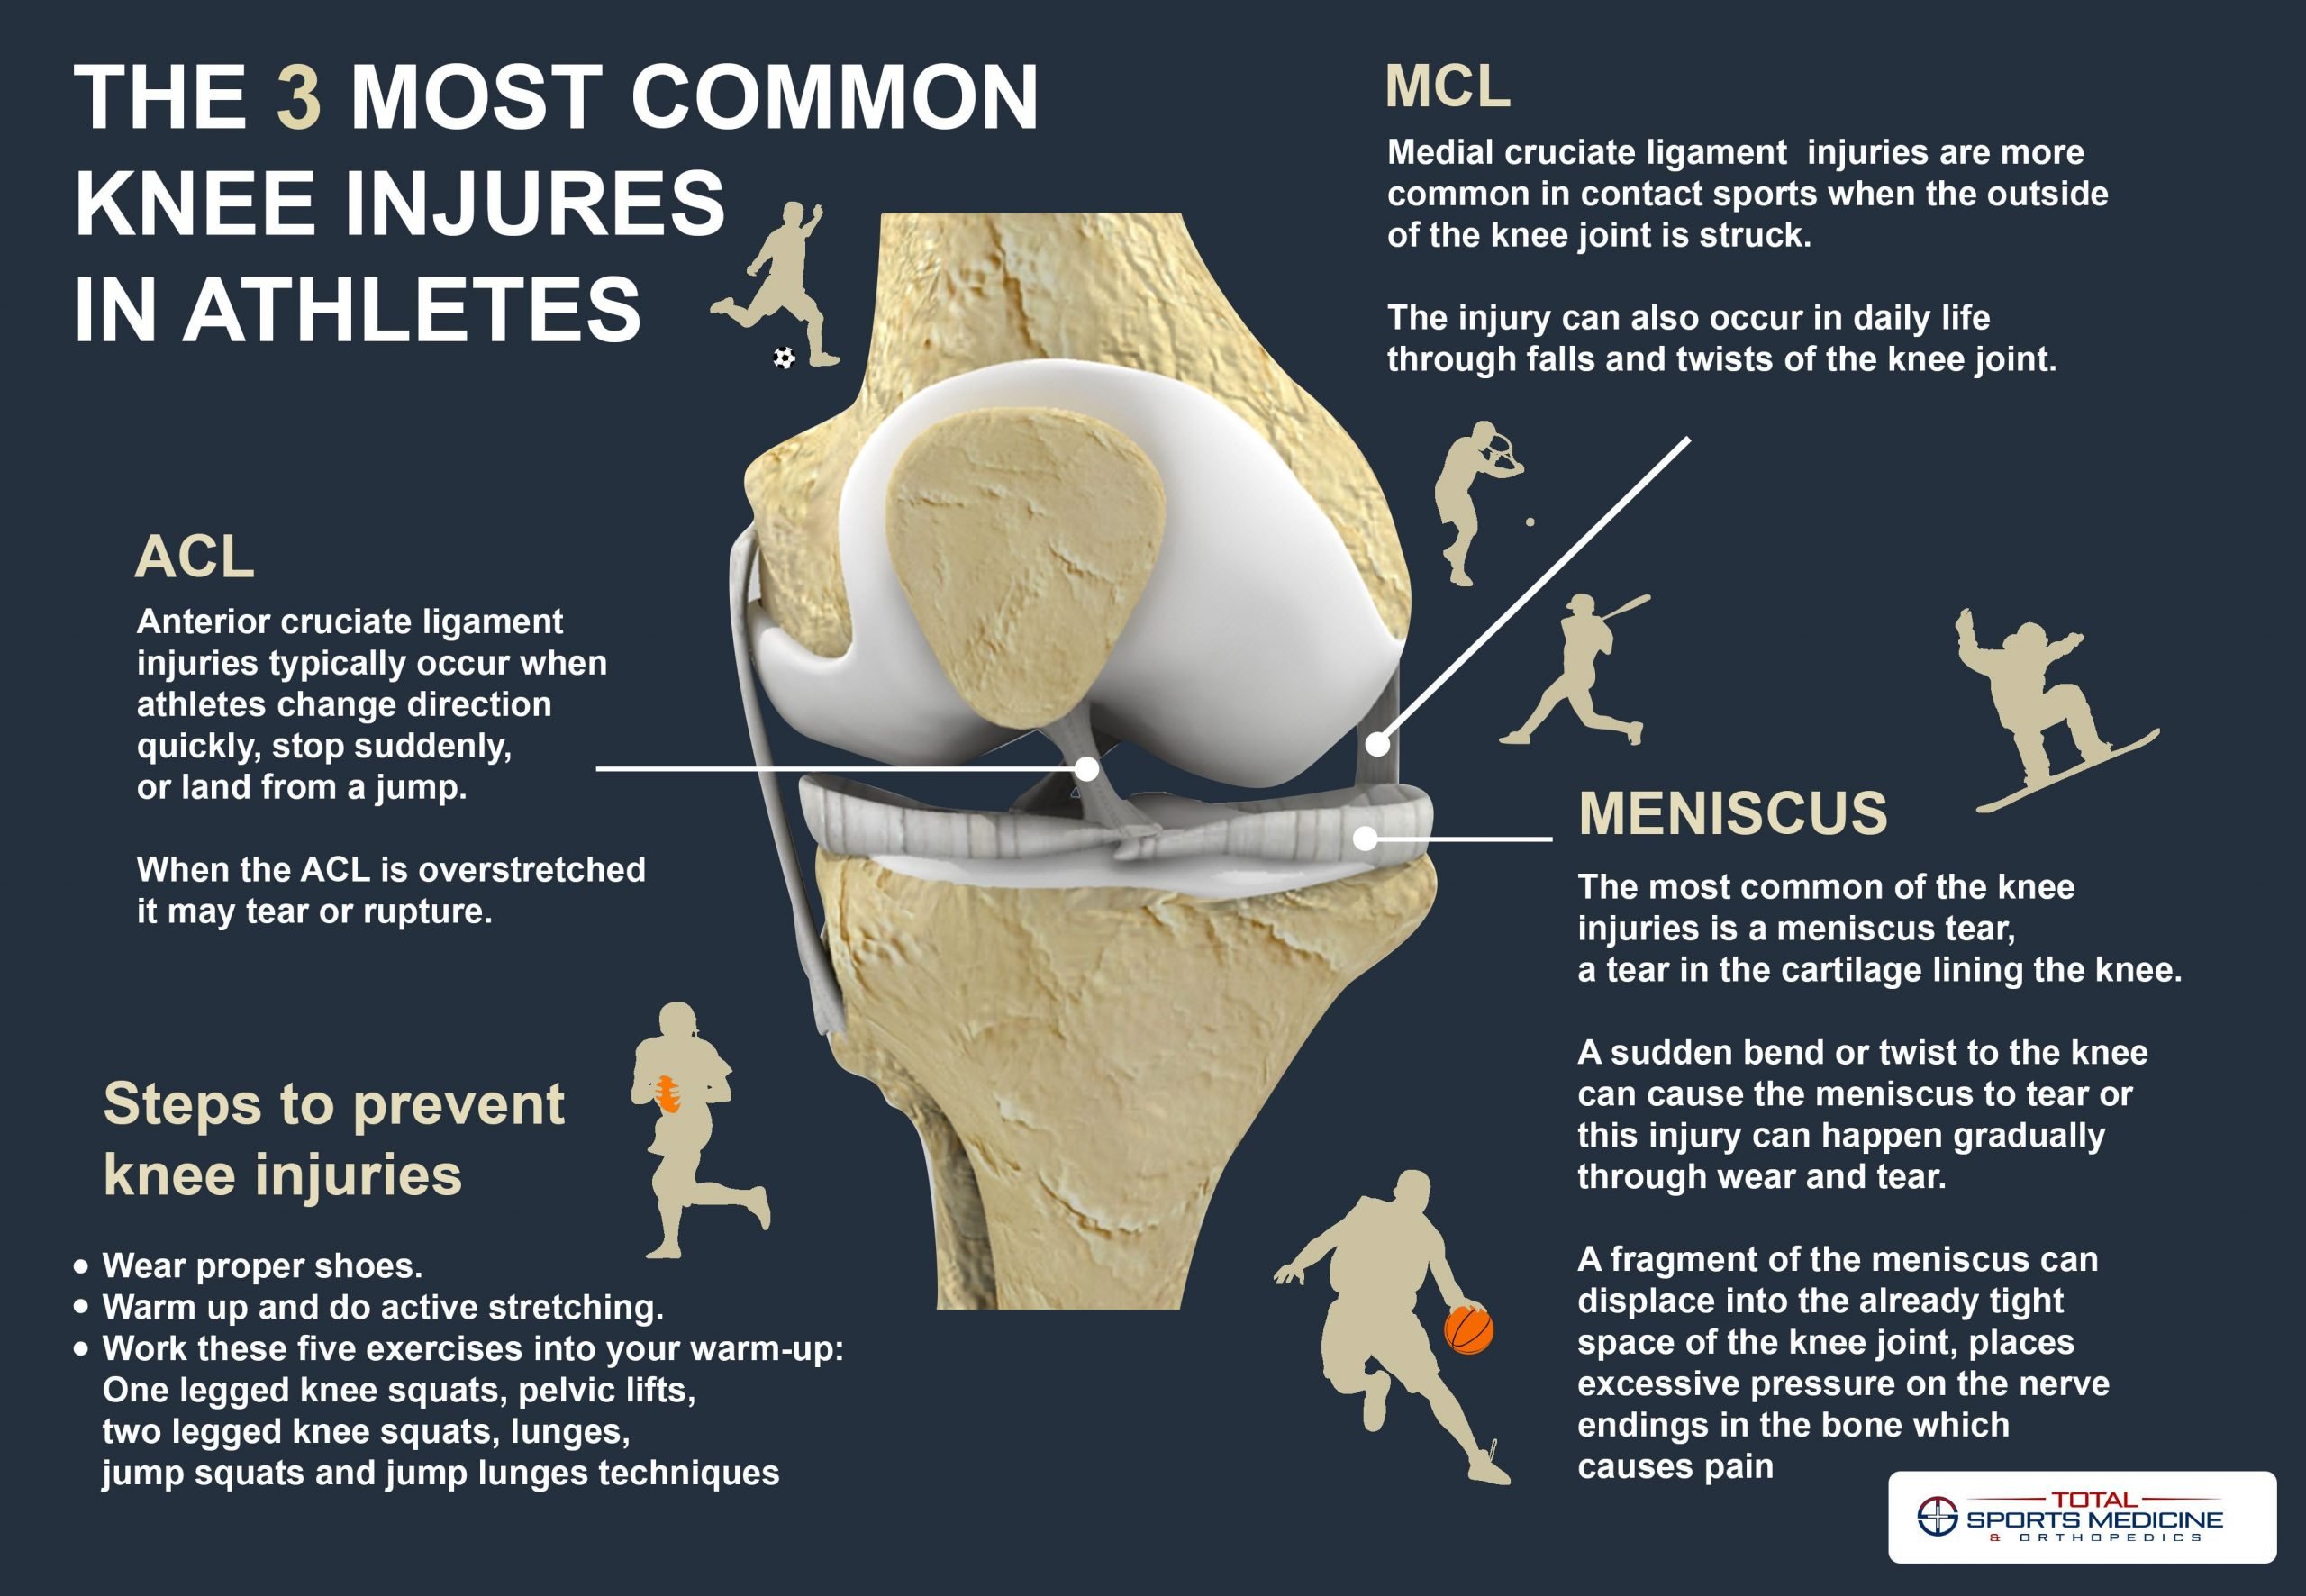 The 3 most common knee injuries in athletes